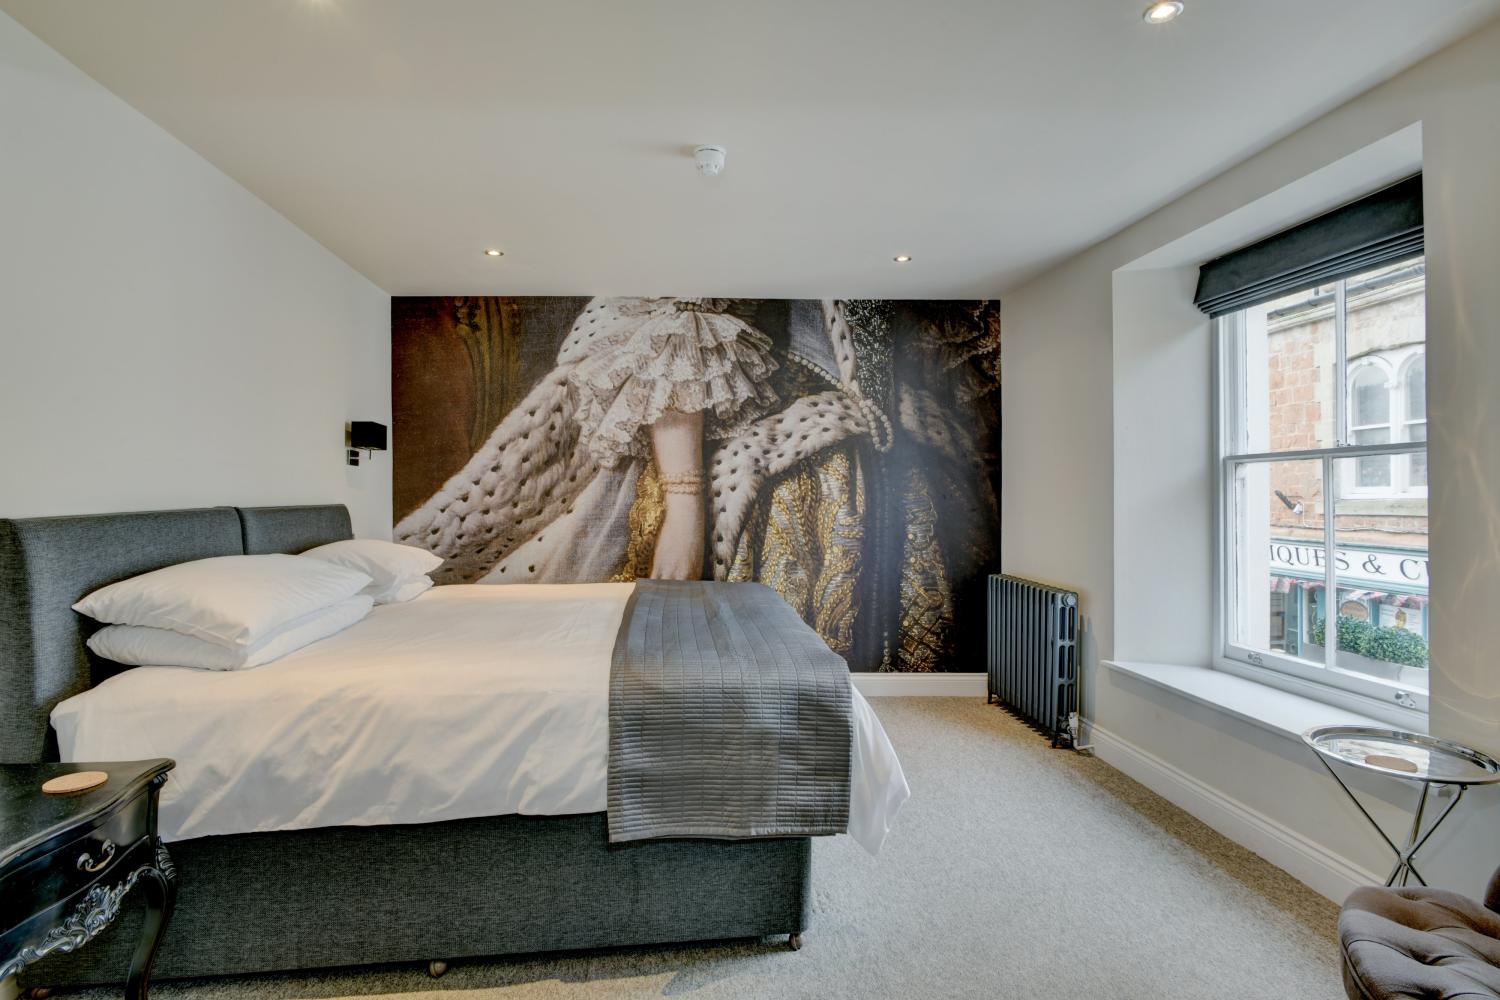 The Queens room. A super king bed or twin upon request when booking. En-suite bath & shower.